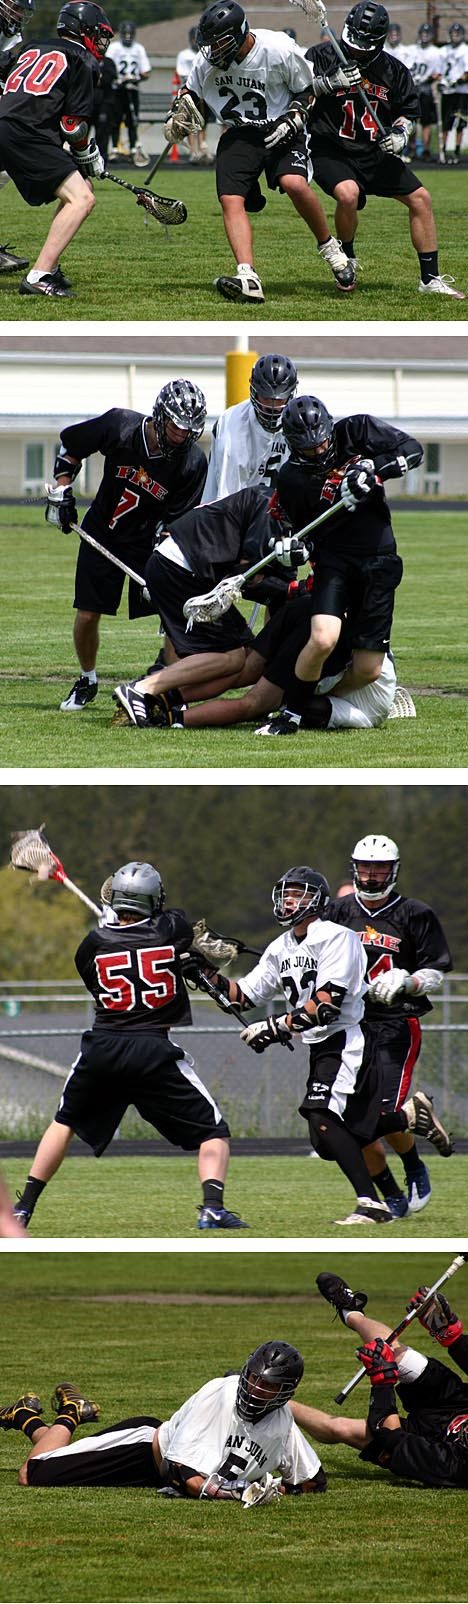 Top photo: San Juan senior attackman Ryan Guard gets squeezed by two Gig Harbor defenders en route to a scoring attempt